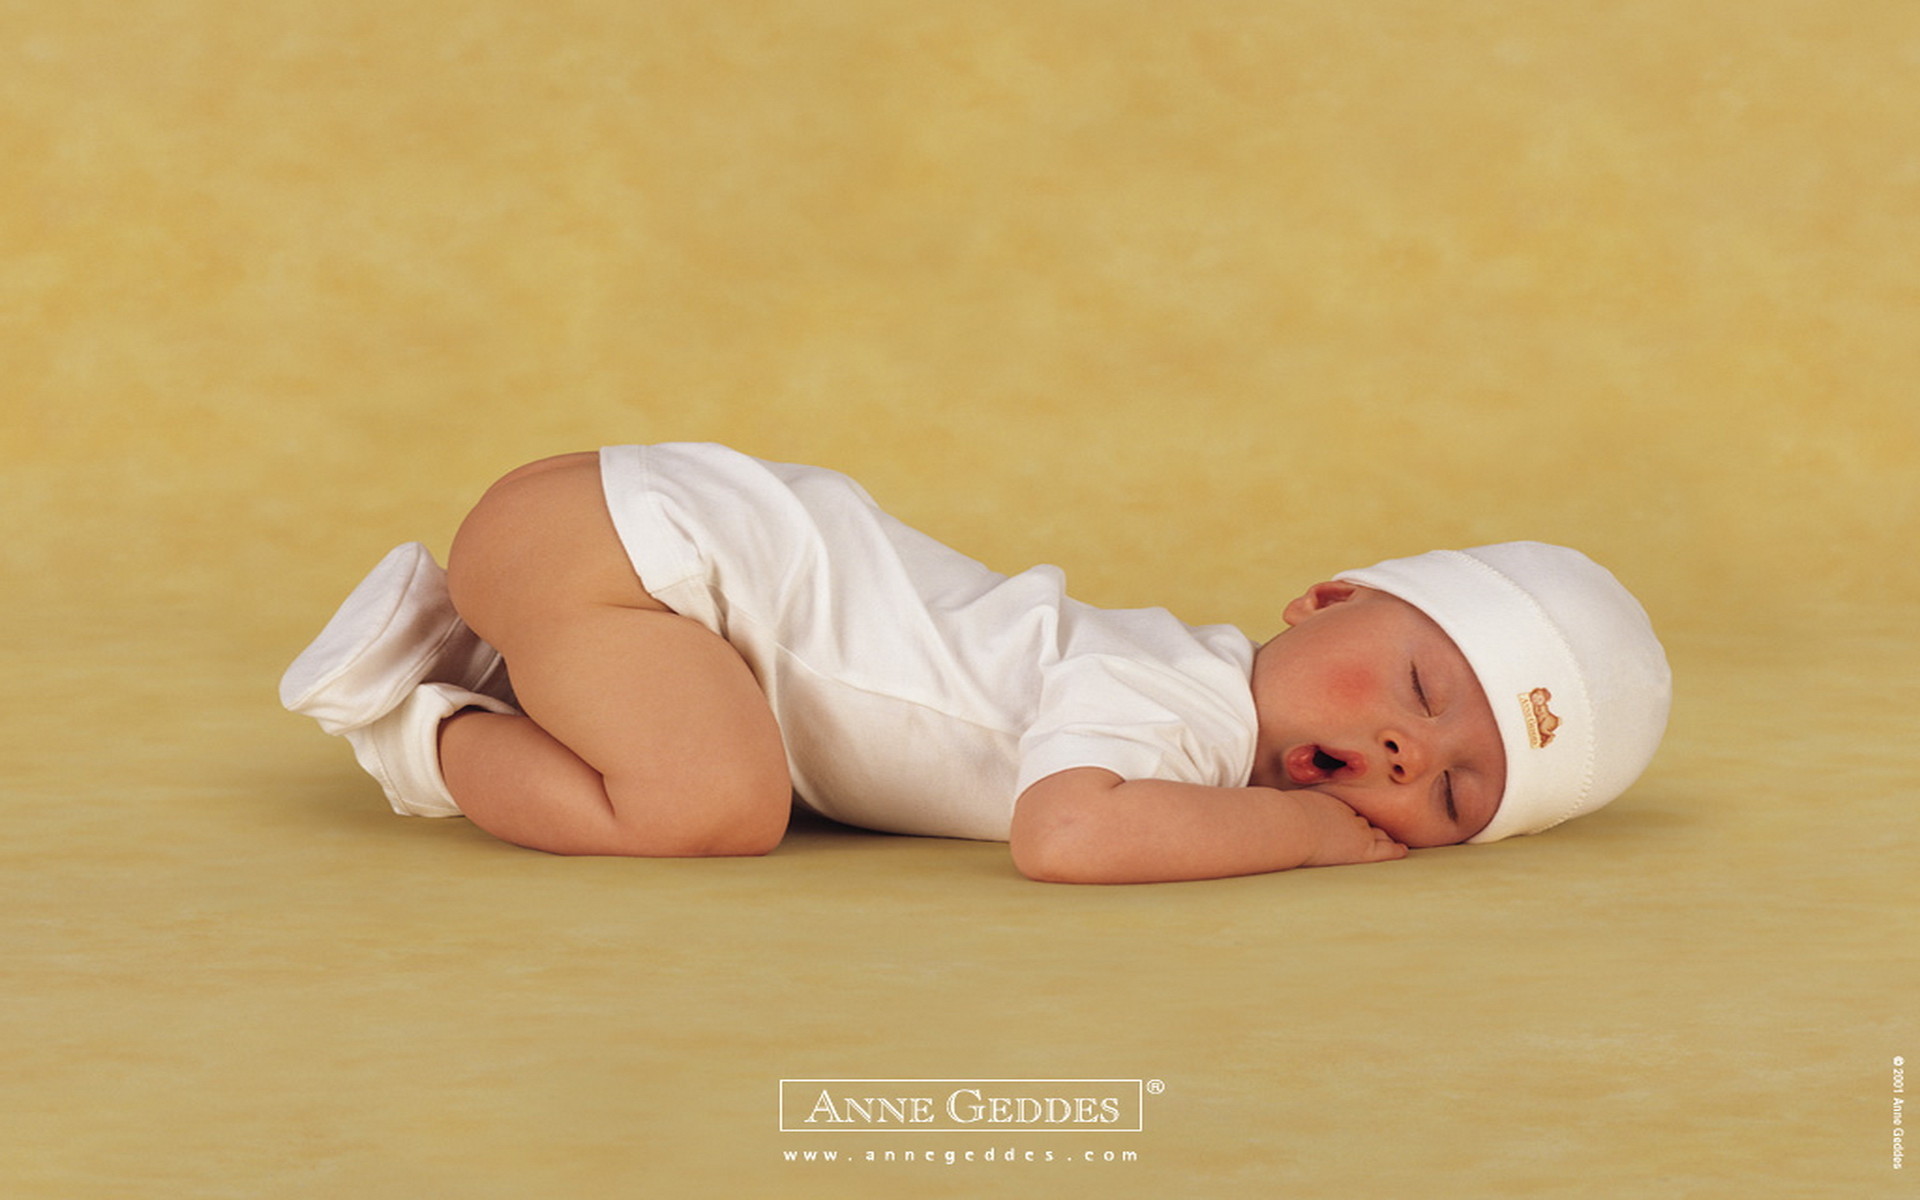 Anne Geddes Christmas Babies Wallpaper Png Image Pngio